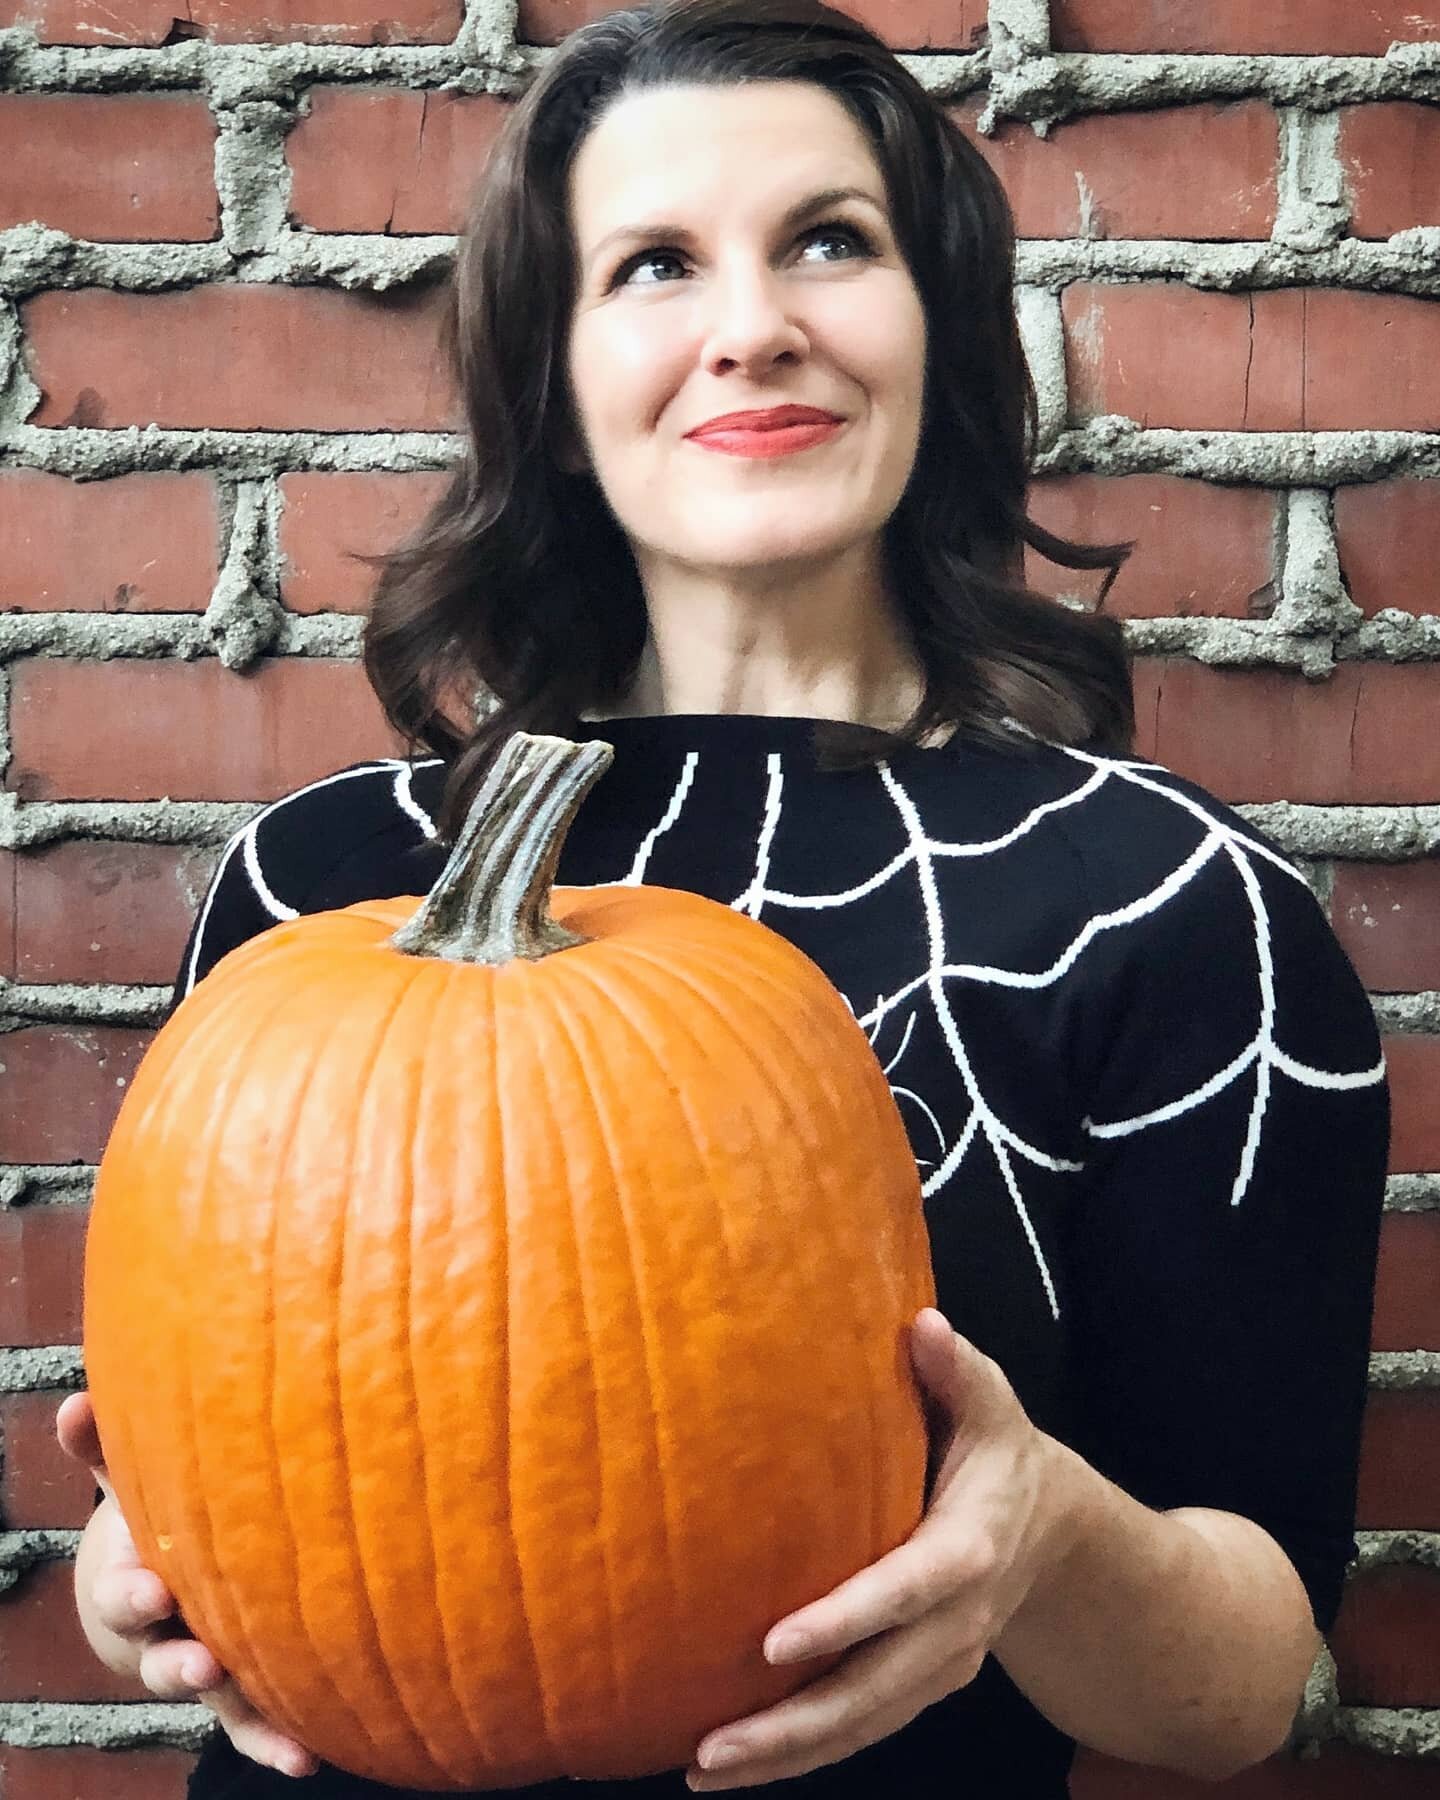 🎃 Happy October! 🎃

I love this time of year - the sense of gathering with friends, harvesting season, and sharing of traditions. What are some things you love doing in October? Are you a spooky person, or are you big into apple picking? Let's shar